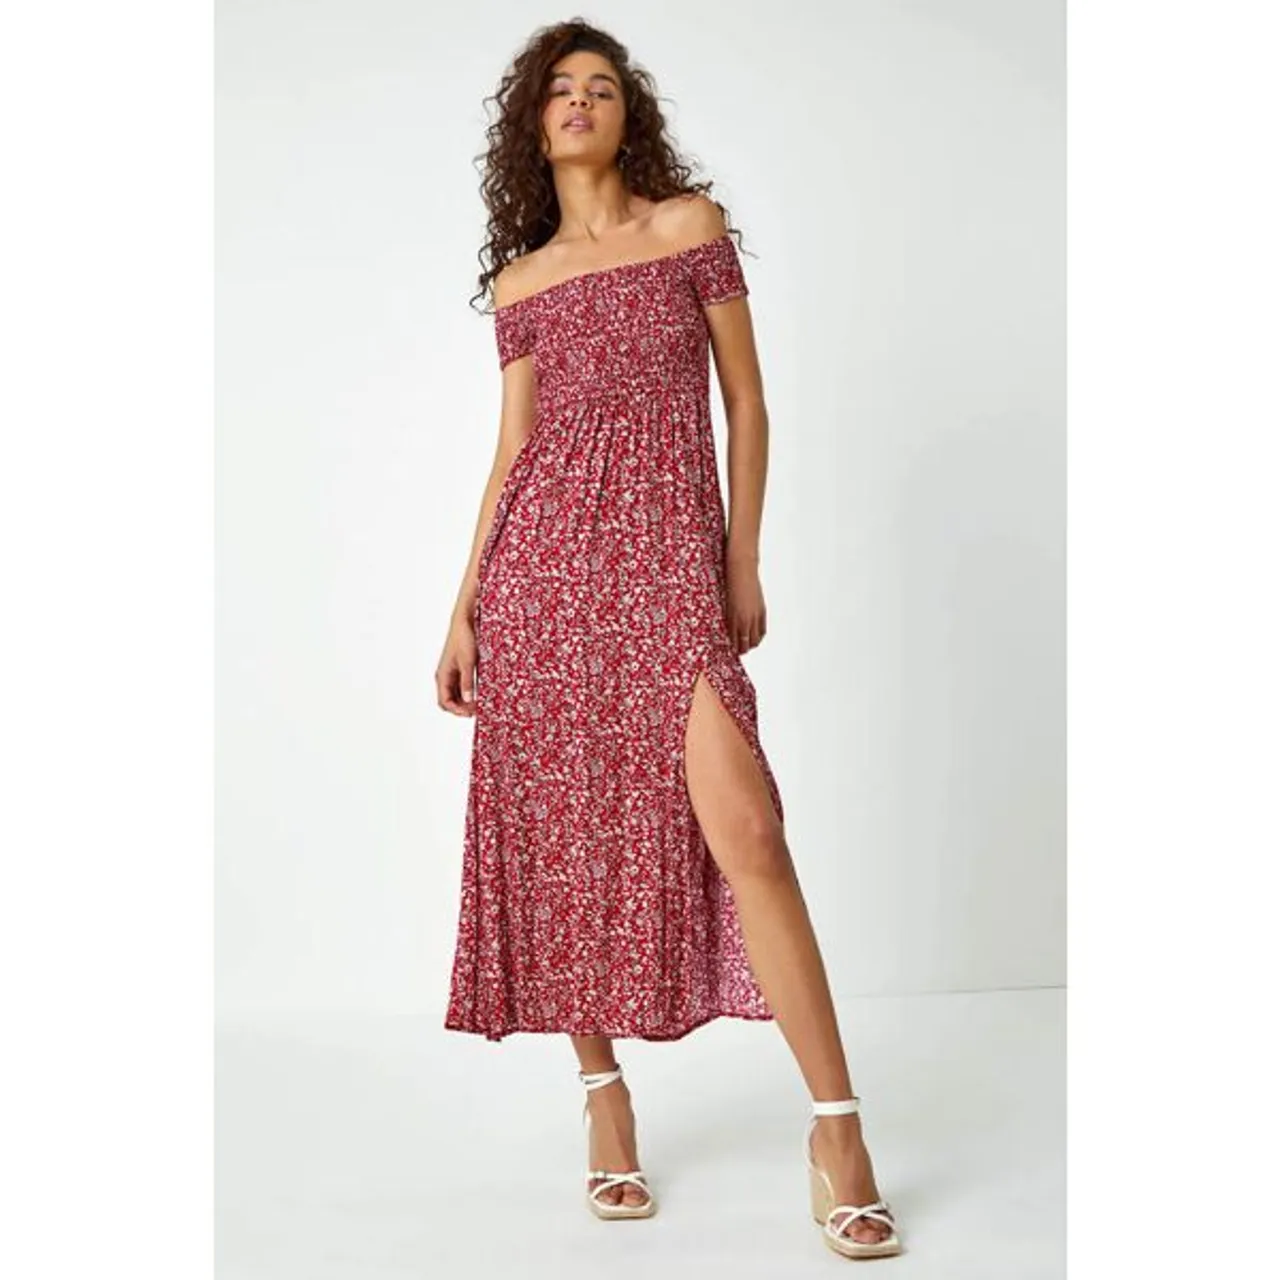 Roman Ditsy Floral Print Bardot Maxi Dress in Red - Size 12 12 female